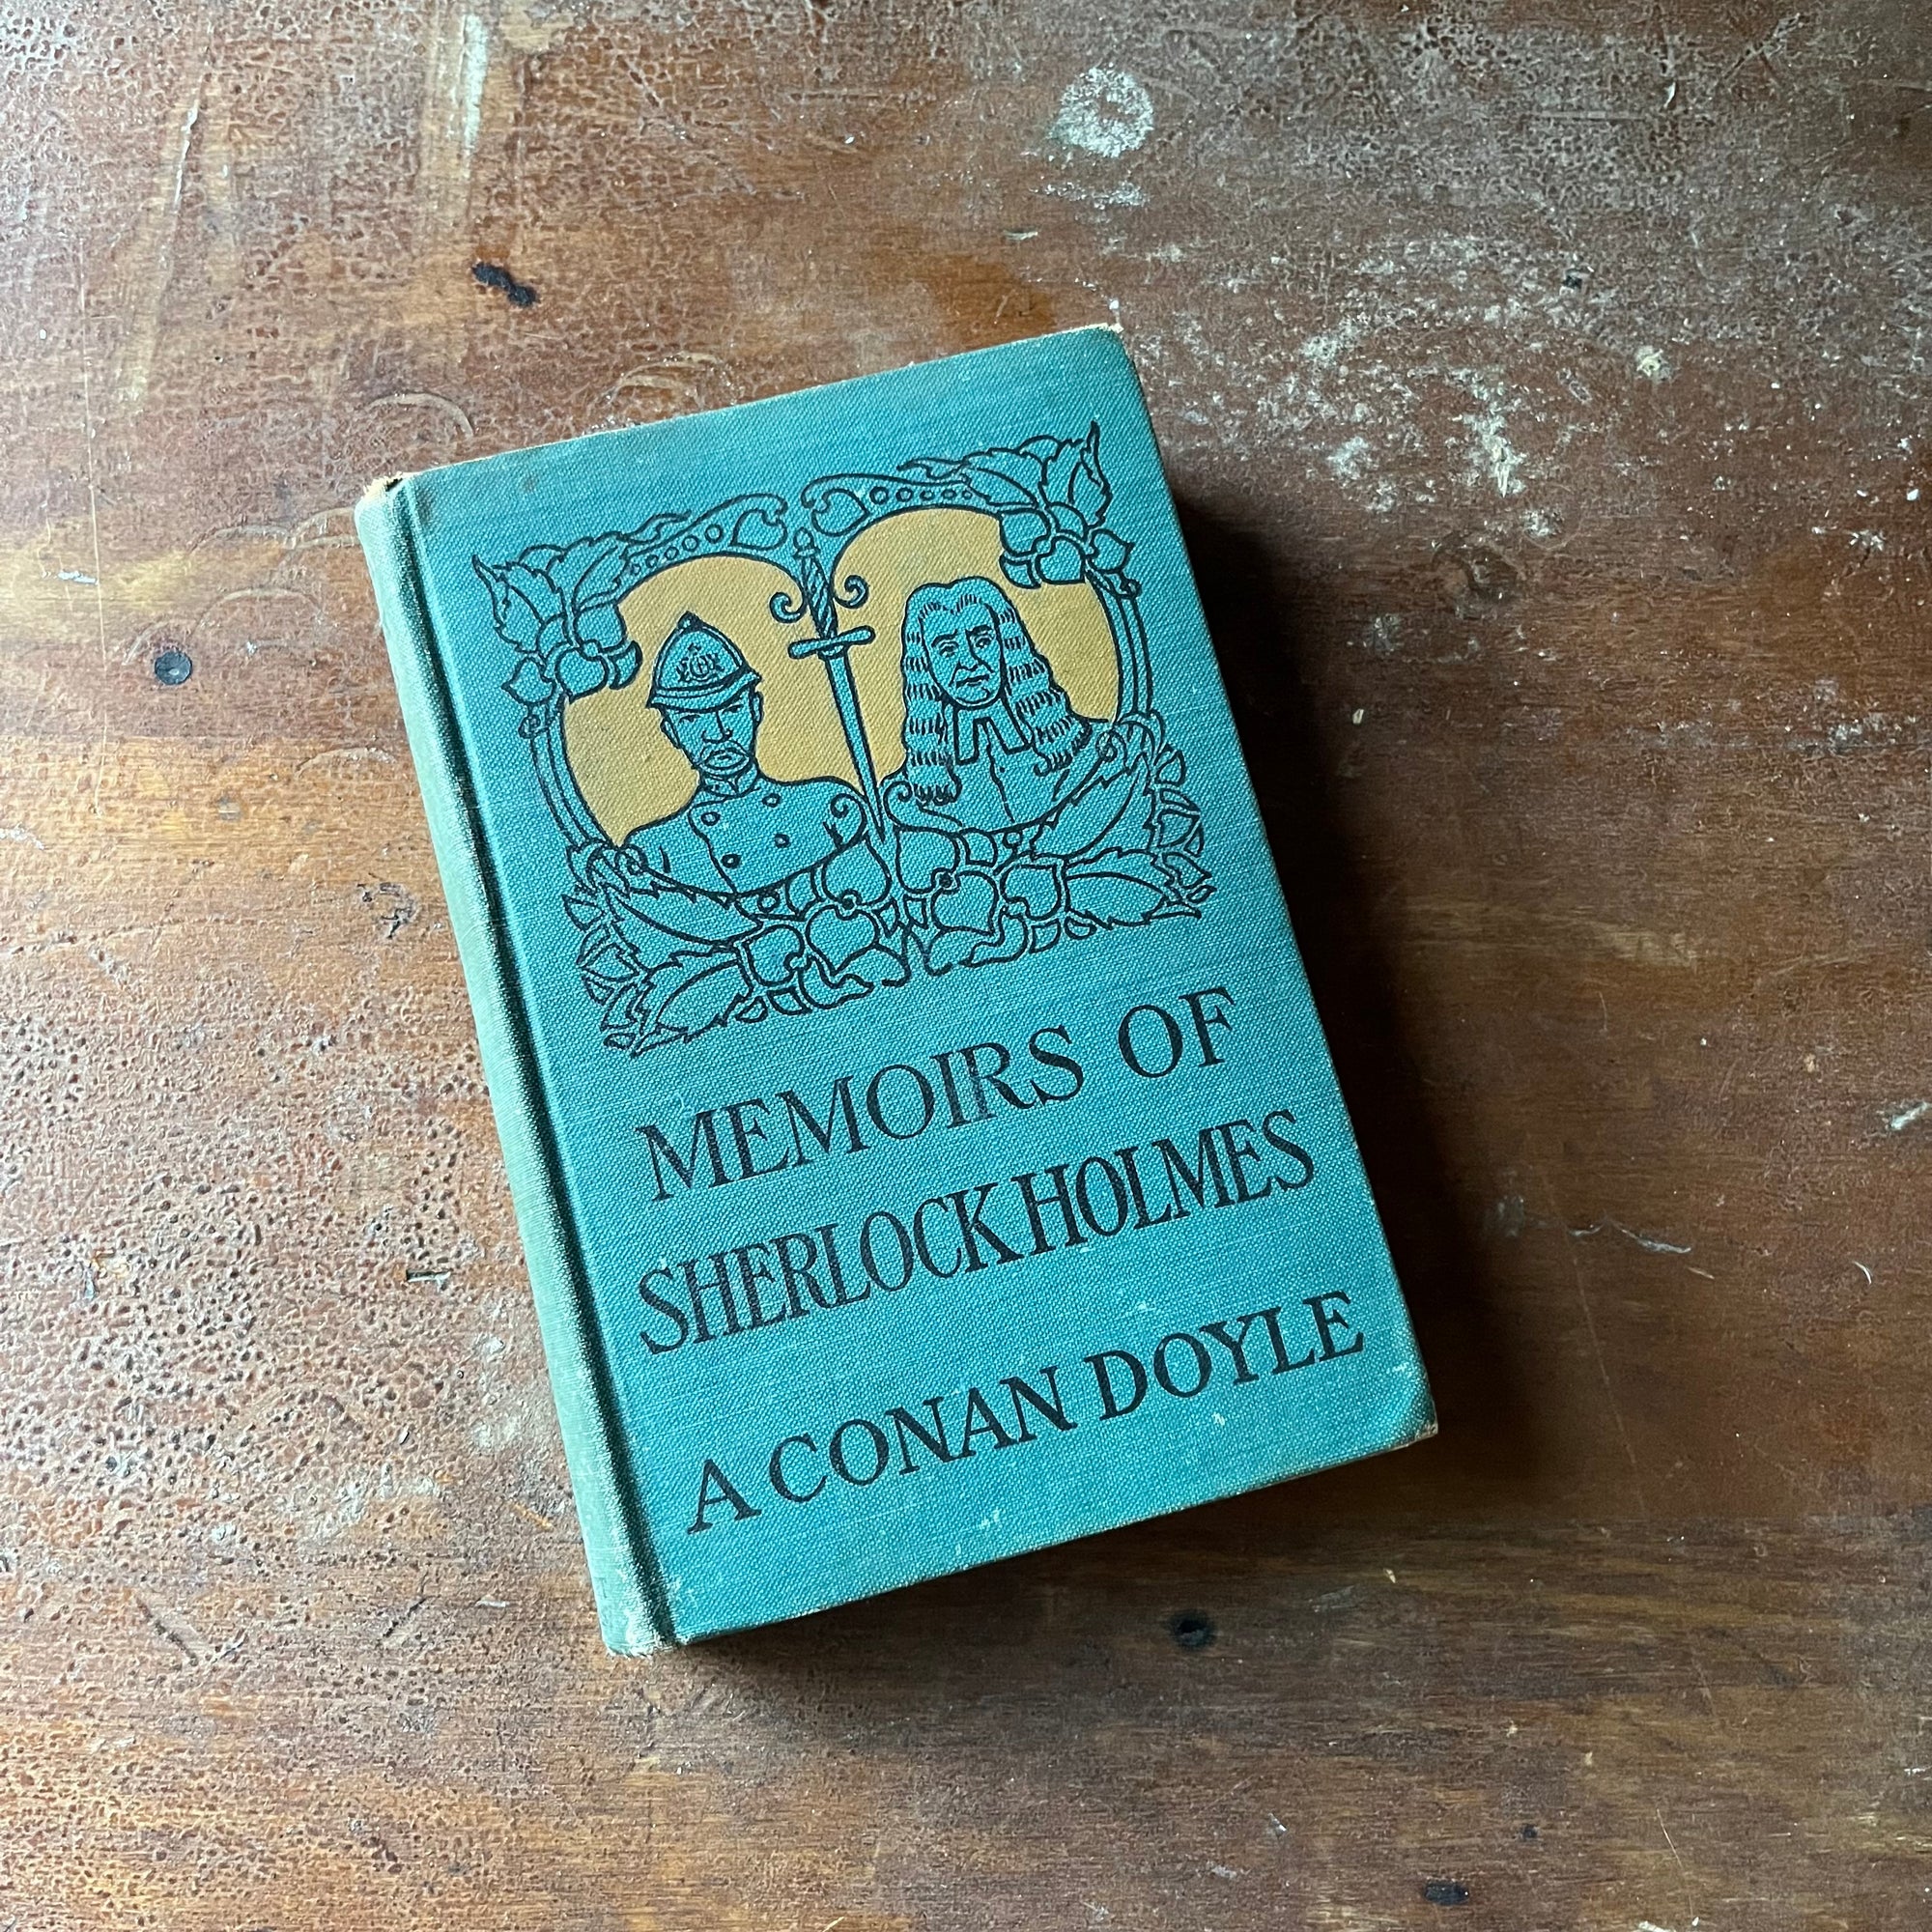 vintage mystery book, Antiquarian book, Sherlock Holmes Mystery, Sir Arthur Conan Doyle - Memoirs of Sherlock Holmes written by A. Conan Doyle - view of the front cover with an illustration of Sherlock & Watson on the front along with book title & author's name